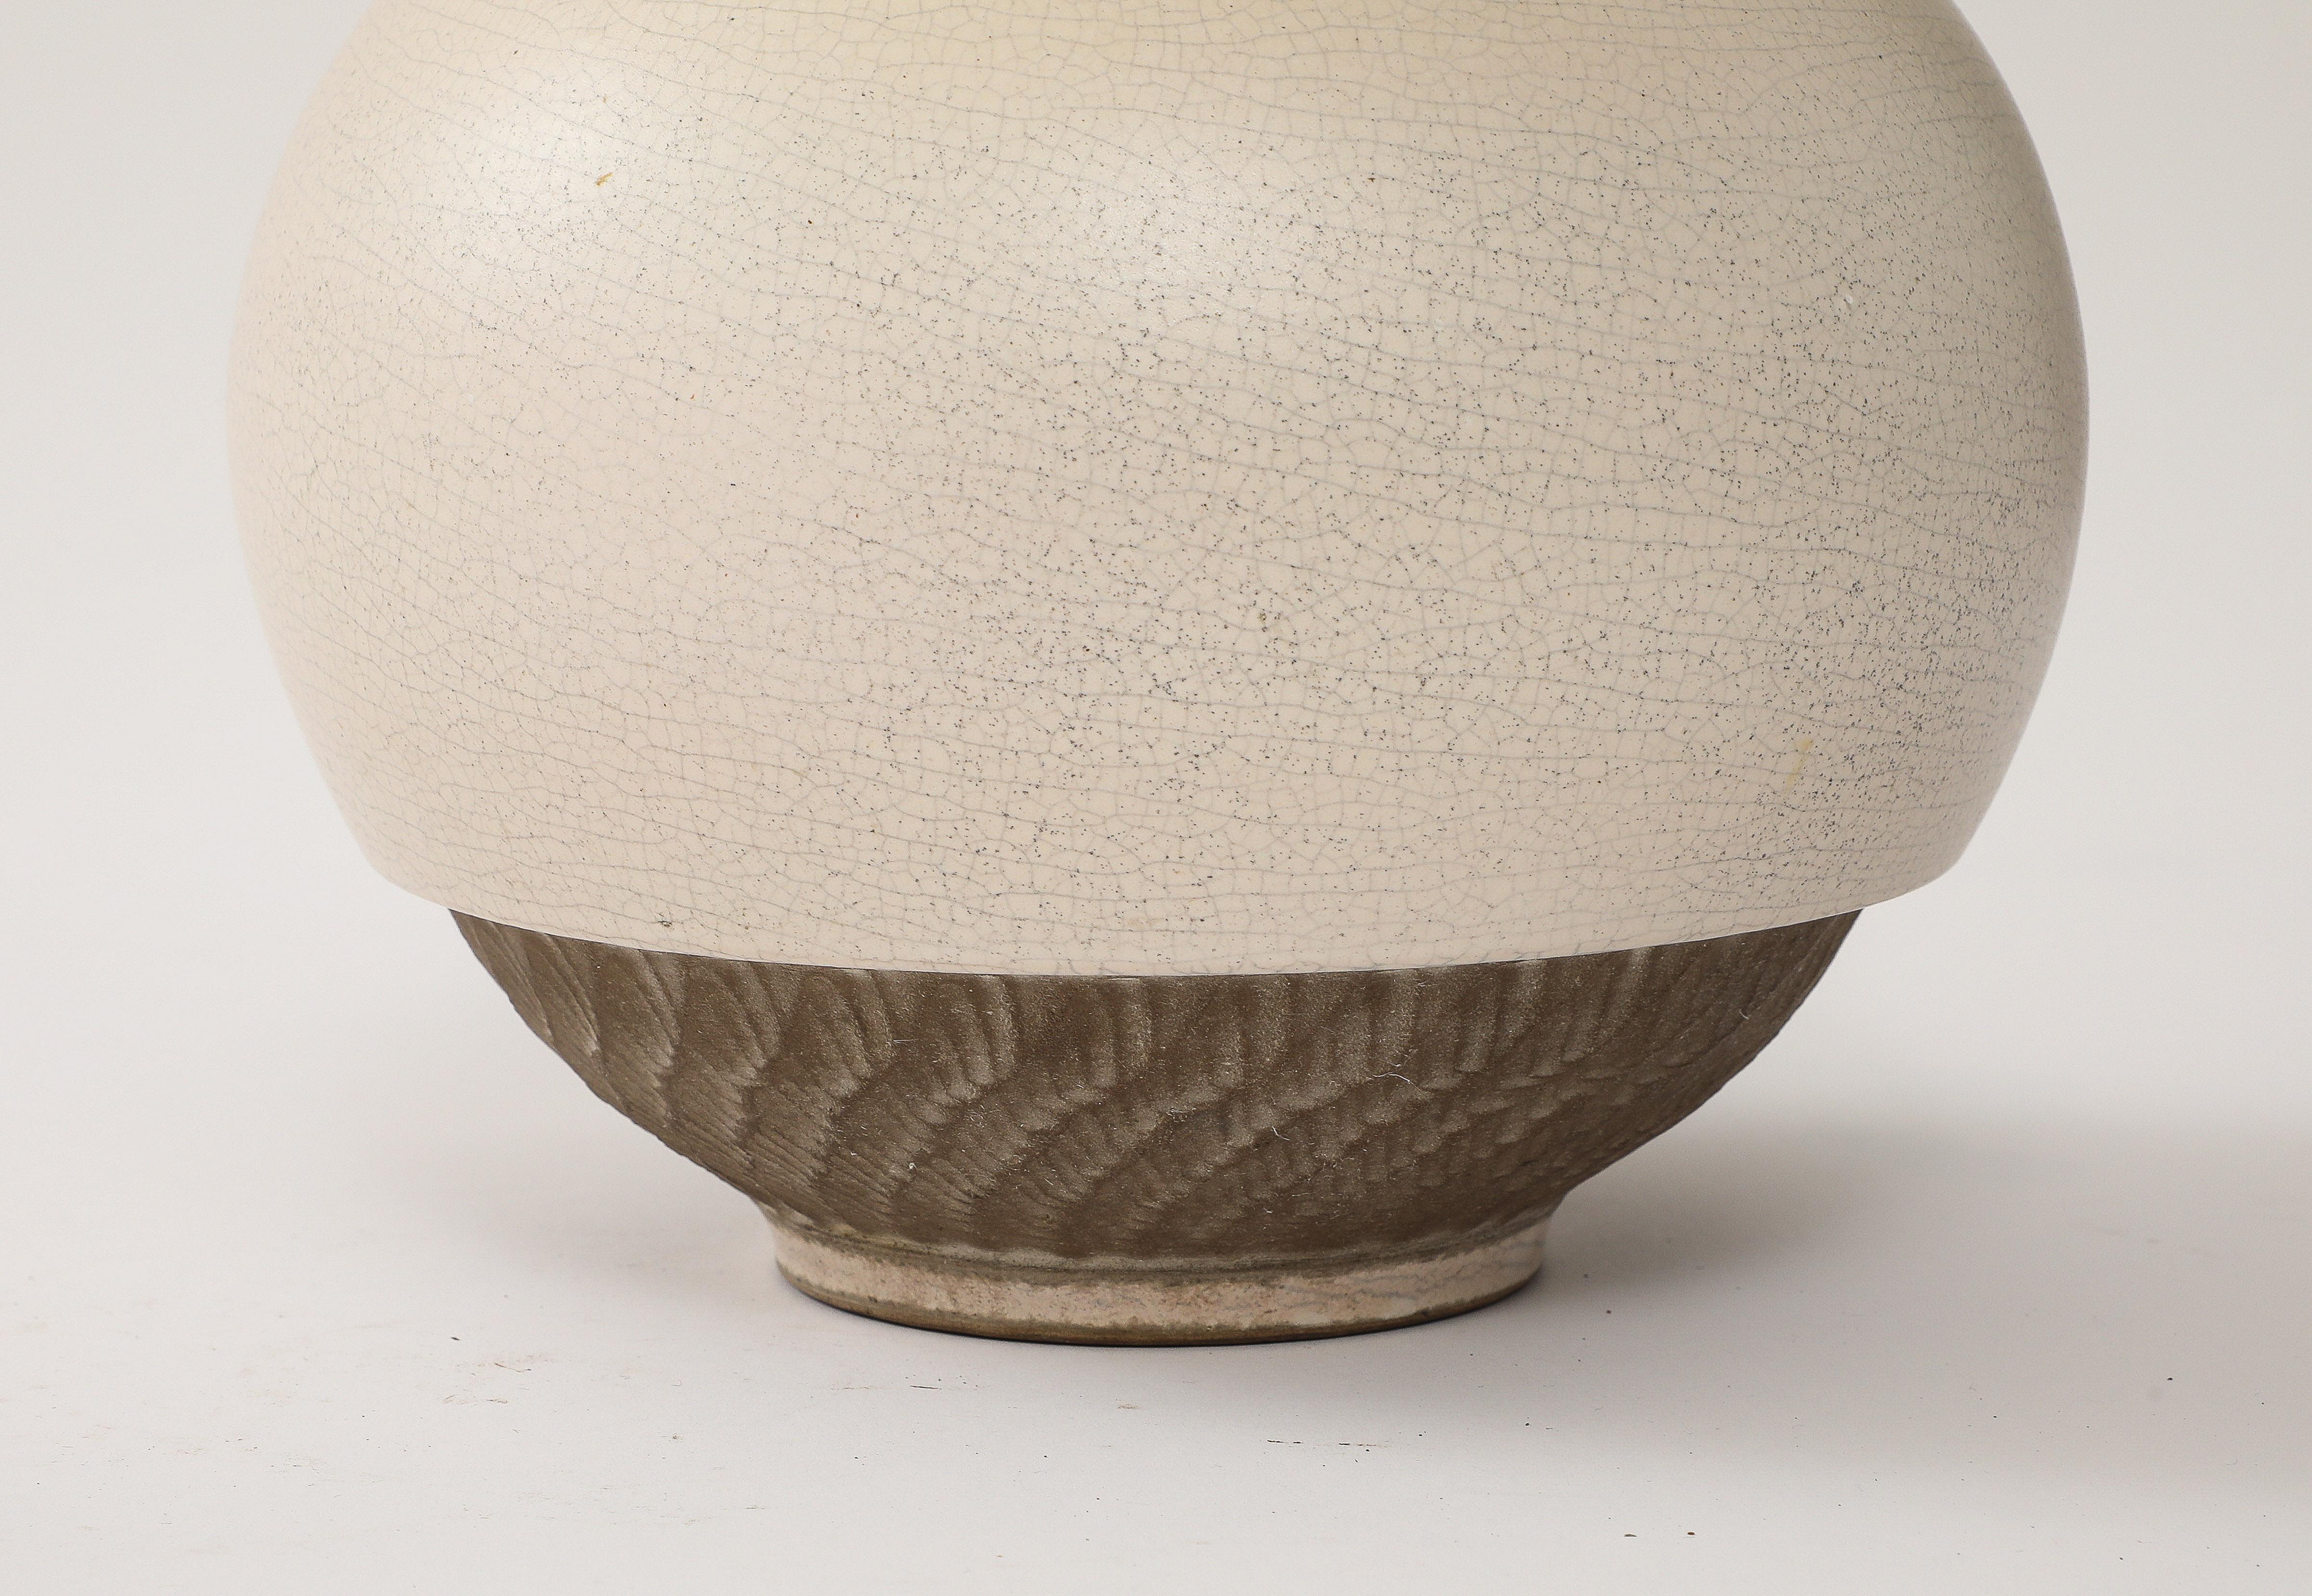 Pol Chambost Off-White Crackle Vase, Brown Incised Bands, Frankreich, 1940, signiert im Angebot 3